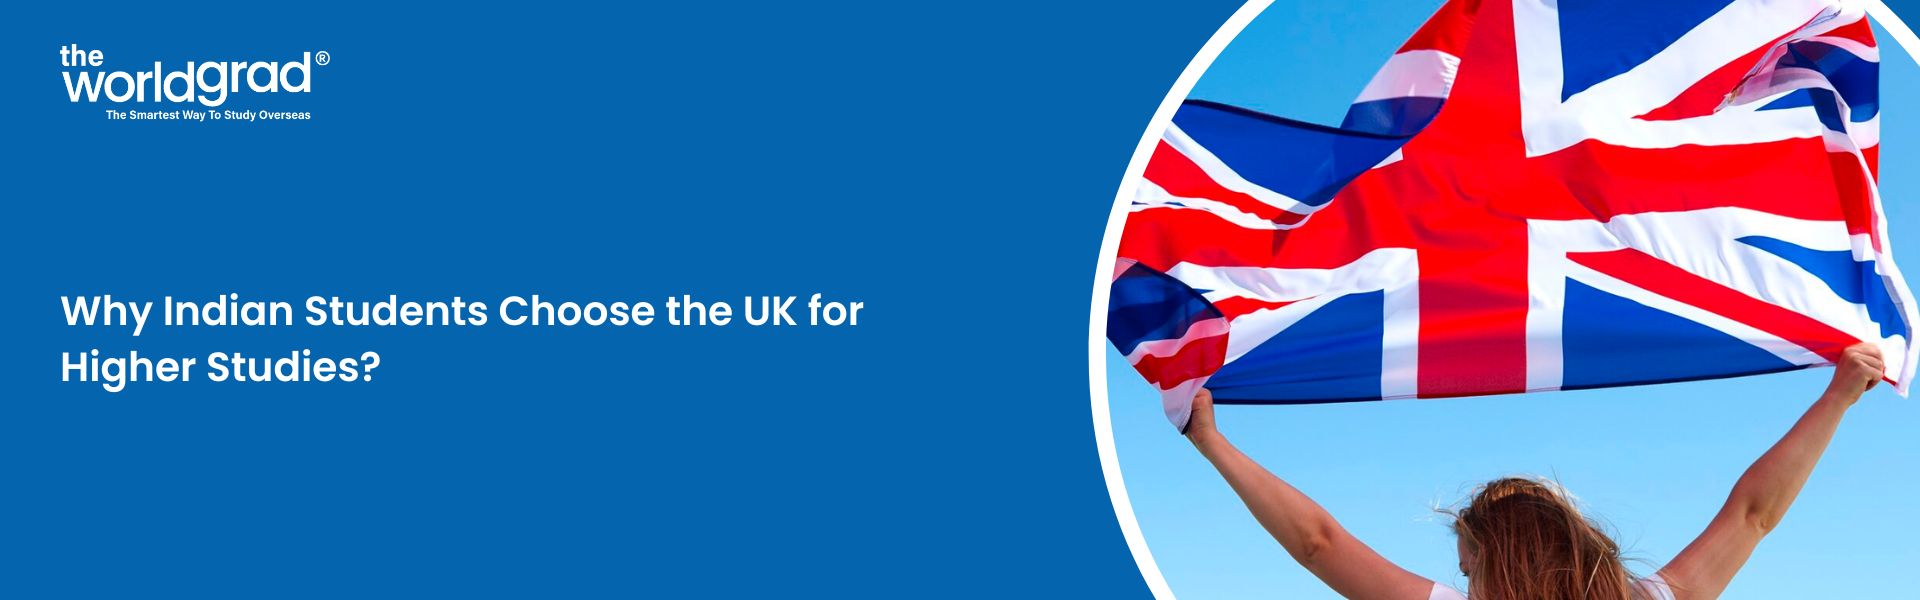 Why Indian Students Choose the UK for Higher Studies?